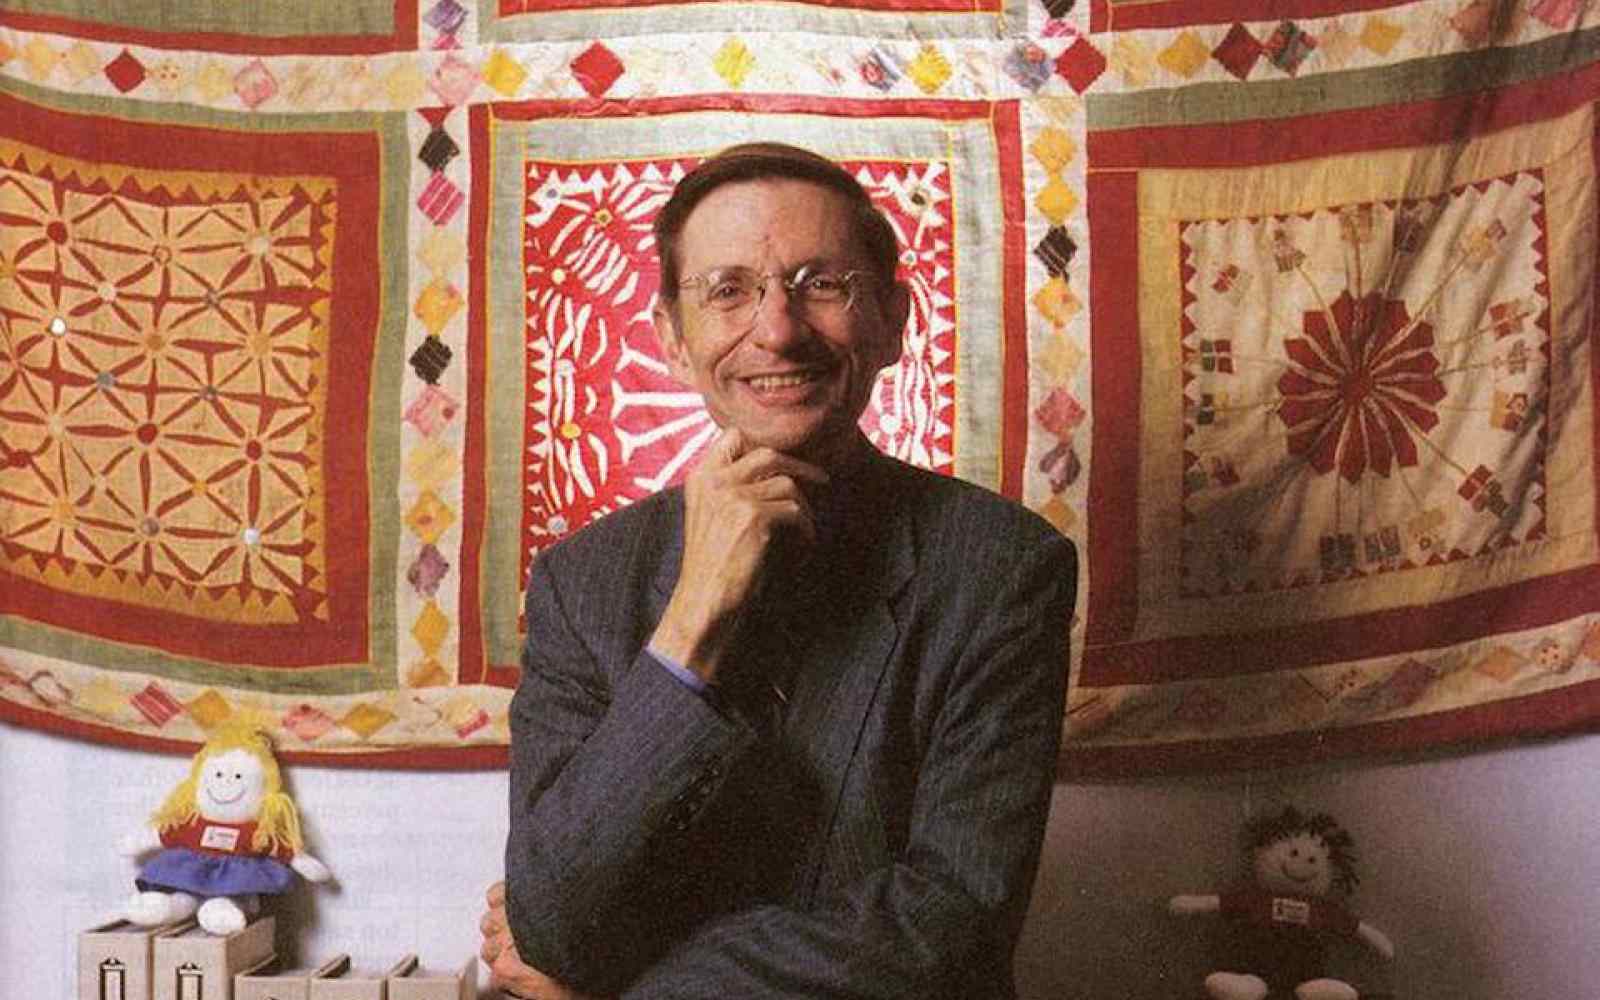 Bill Drayton in front of India textile